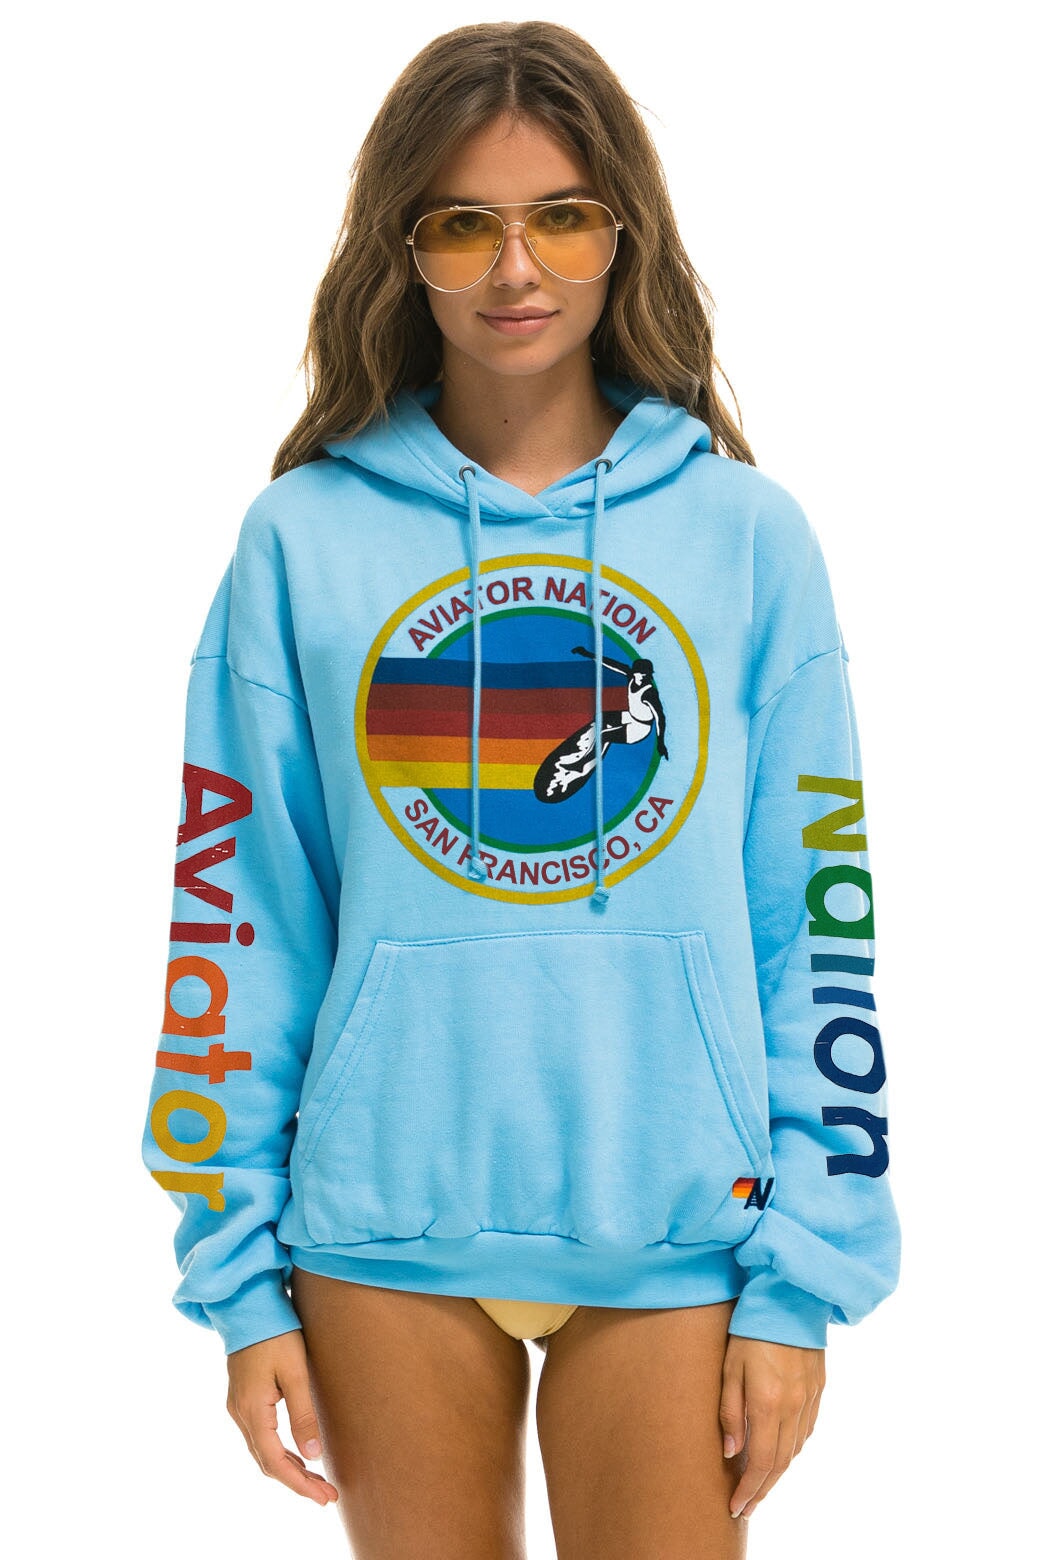 AVIATOR NATION SAN FRANCISCO RELAXED PULLOVER HOODIE - SKY Hoodie Aviator Nation 